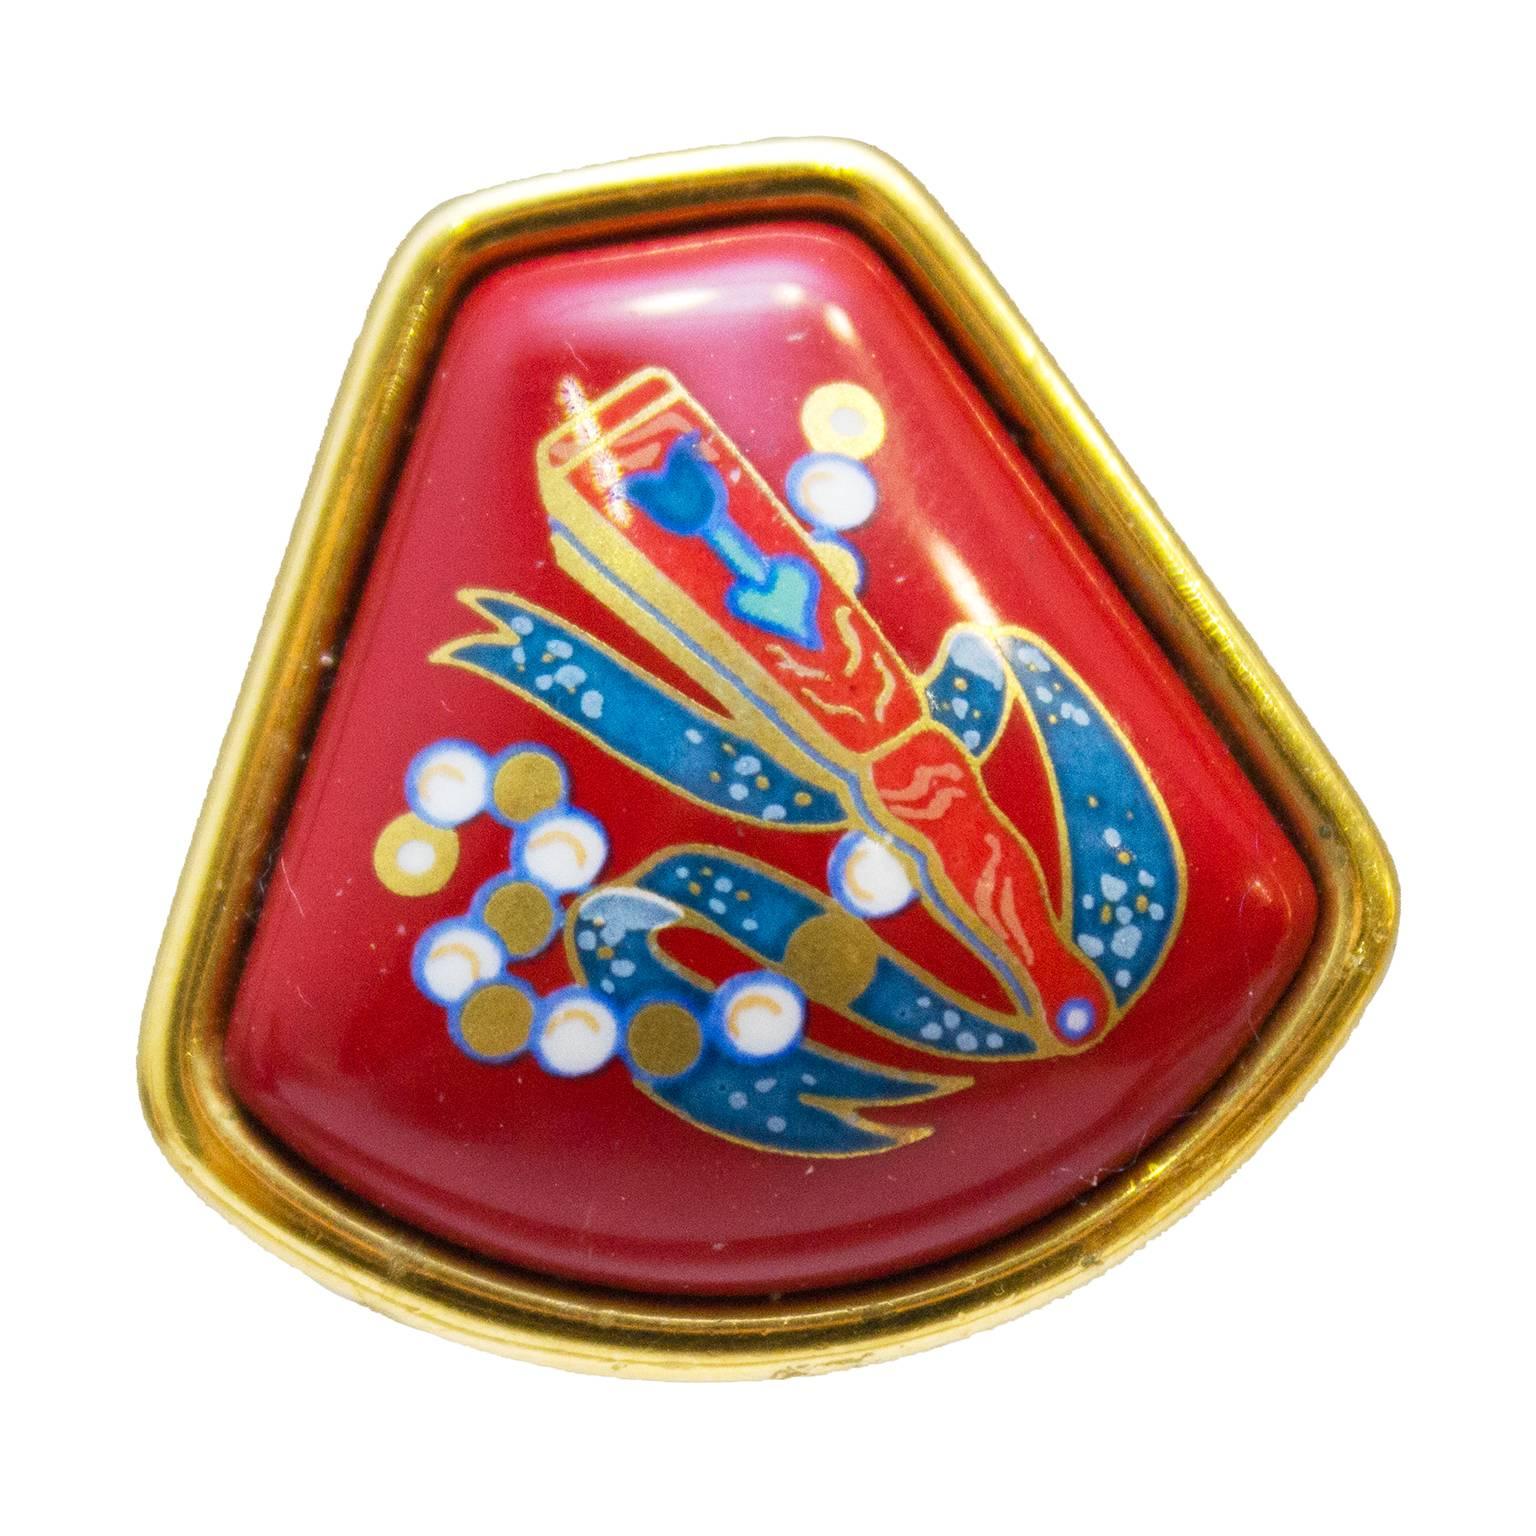 Elegant enamel clip on earrings from Hermes circa 1980. Signed on the back with the Hermes stamp. Modern fan shape with vibrant red enamel background featuring blue, gold and white Asian inspired imagery. In excellent condition. Medium size.

1in